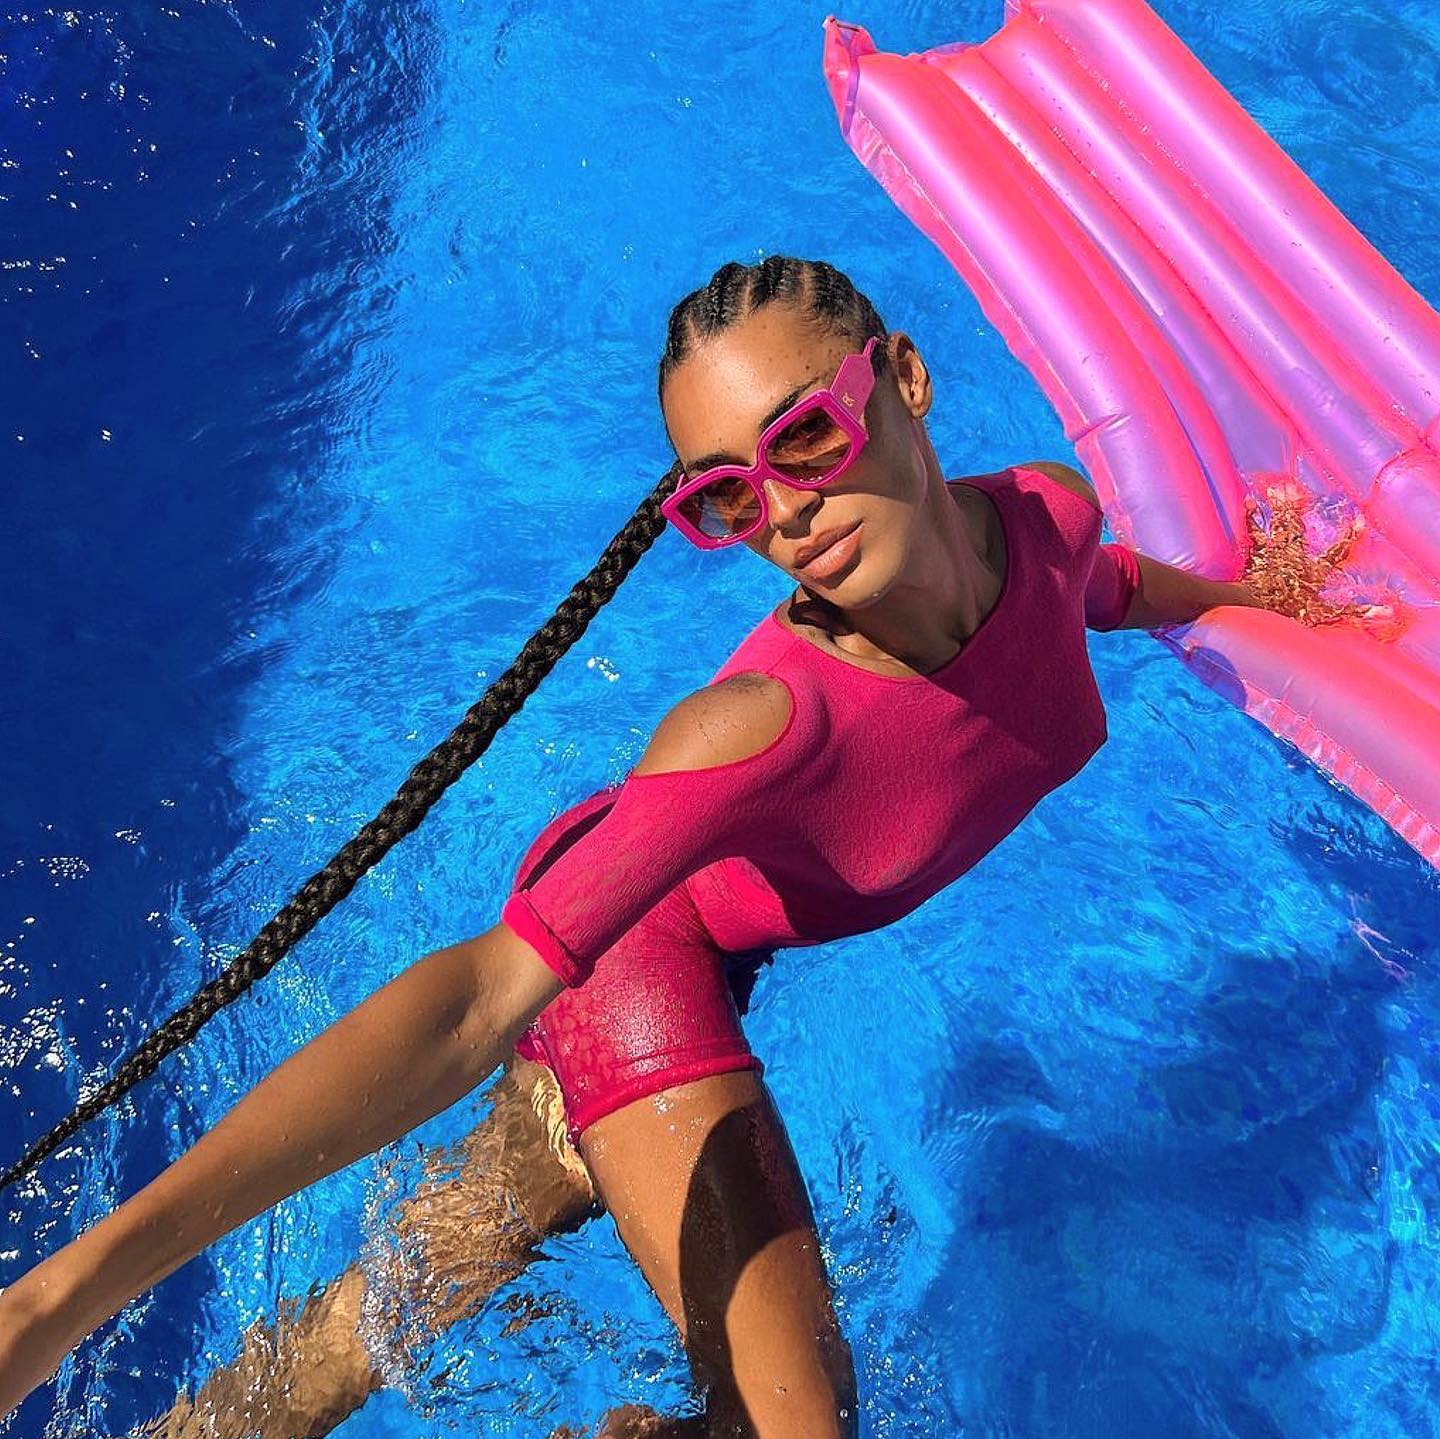 Have a fantastic summer filled with sunny adventures and unforgettable moments! 💕& Don't forget to protect your eyes in style with our Emmanuelle Khanh sunglasses! 🥰

#emmanuellekhanh #optiekvanlindt #summerstyle #pinksunglasses #ootd 

🌴 Summer Vacation: July 21th to July 22th & August 8th to August 15th 🌴